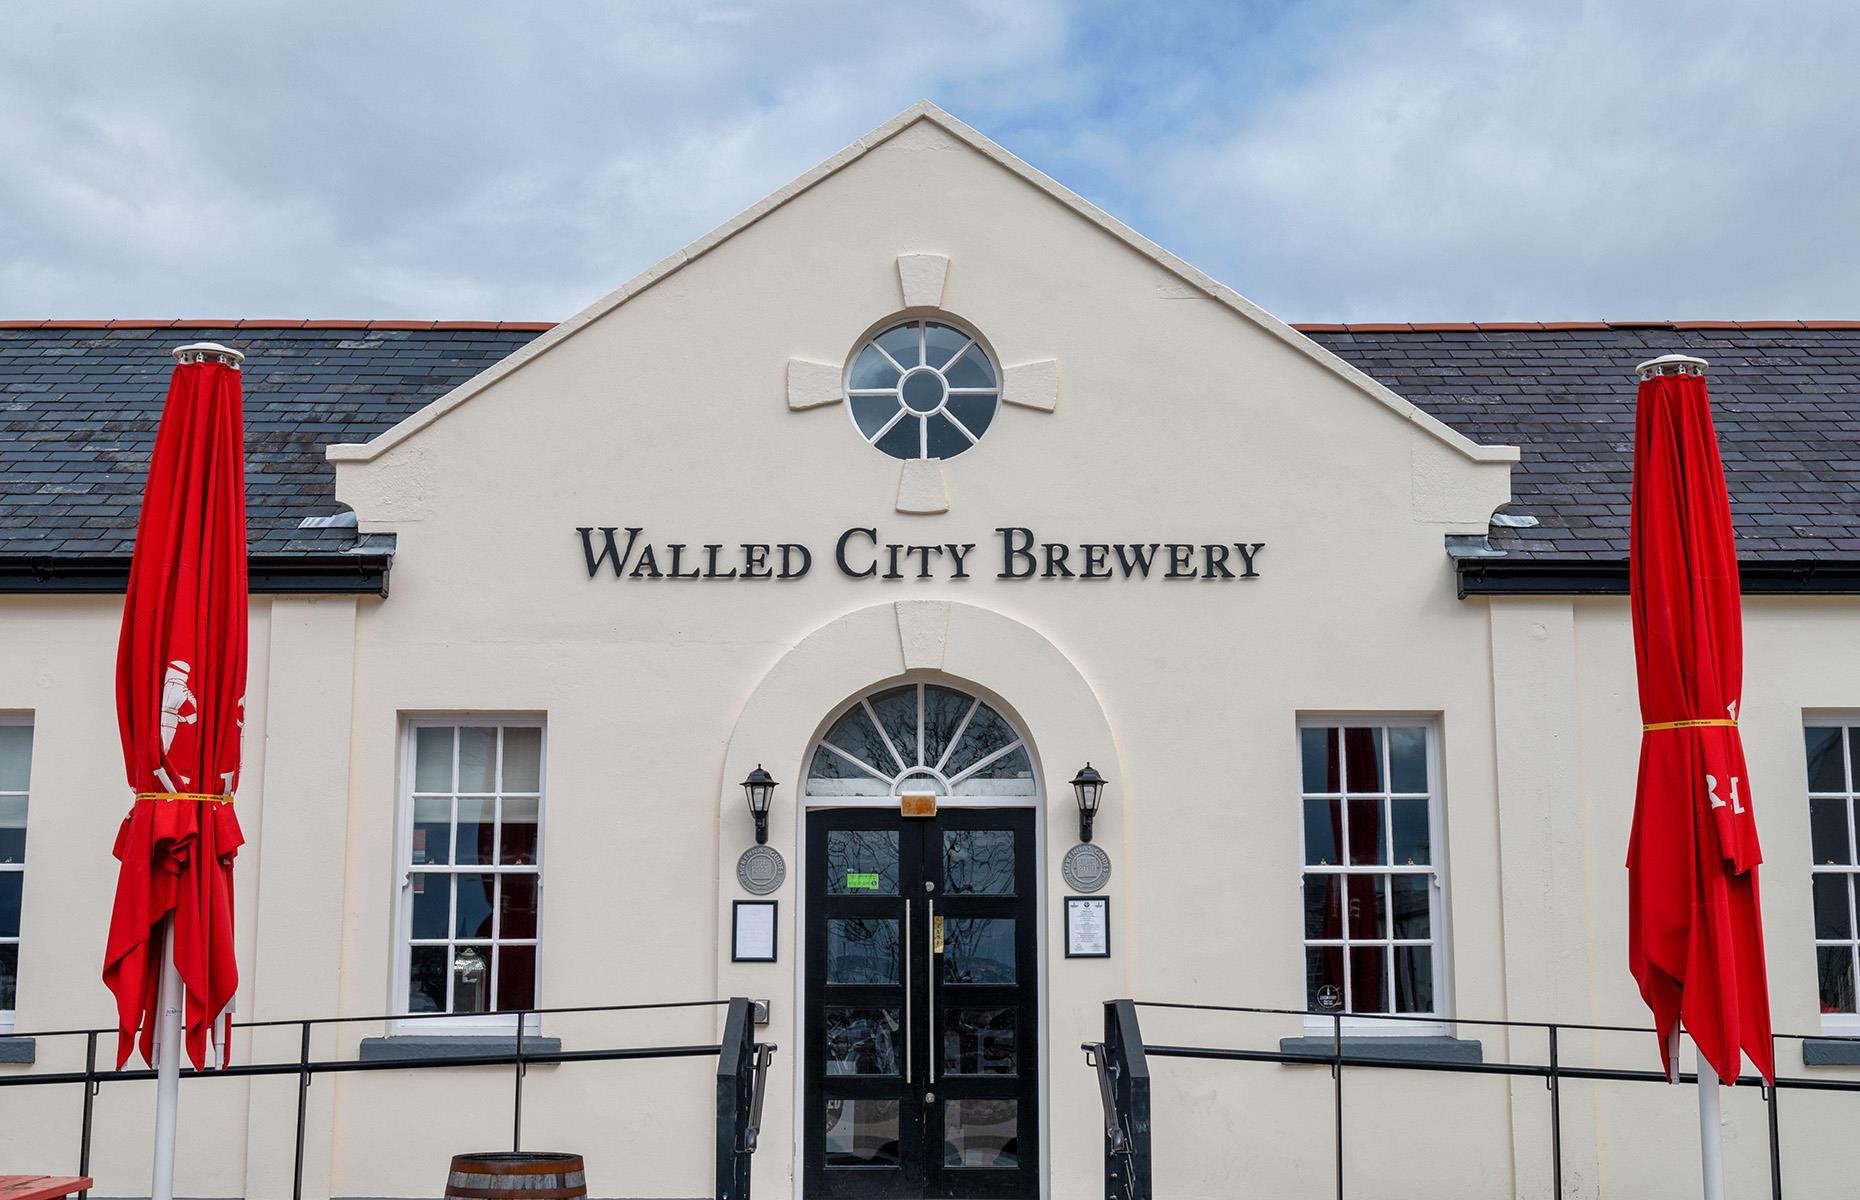 <p>The best way to end a day in Derry/Londonderry is within the warm and welcoming confines of the <a href="https://www.walledcitybrewery.com/">Walled City Brewery</a>. Here, the self-proclaimed “expert hipster brewers” will take you on a tour of the facilities, letting you taste the different grains used, showing you the equipment for the brewing process and explaining the history of the brewery itself, which originally opened in 1872.</p>  <p>At the end of the tour comes the highlight – the opportunity to pull your own pint of choice, straight from the keg.</p>